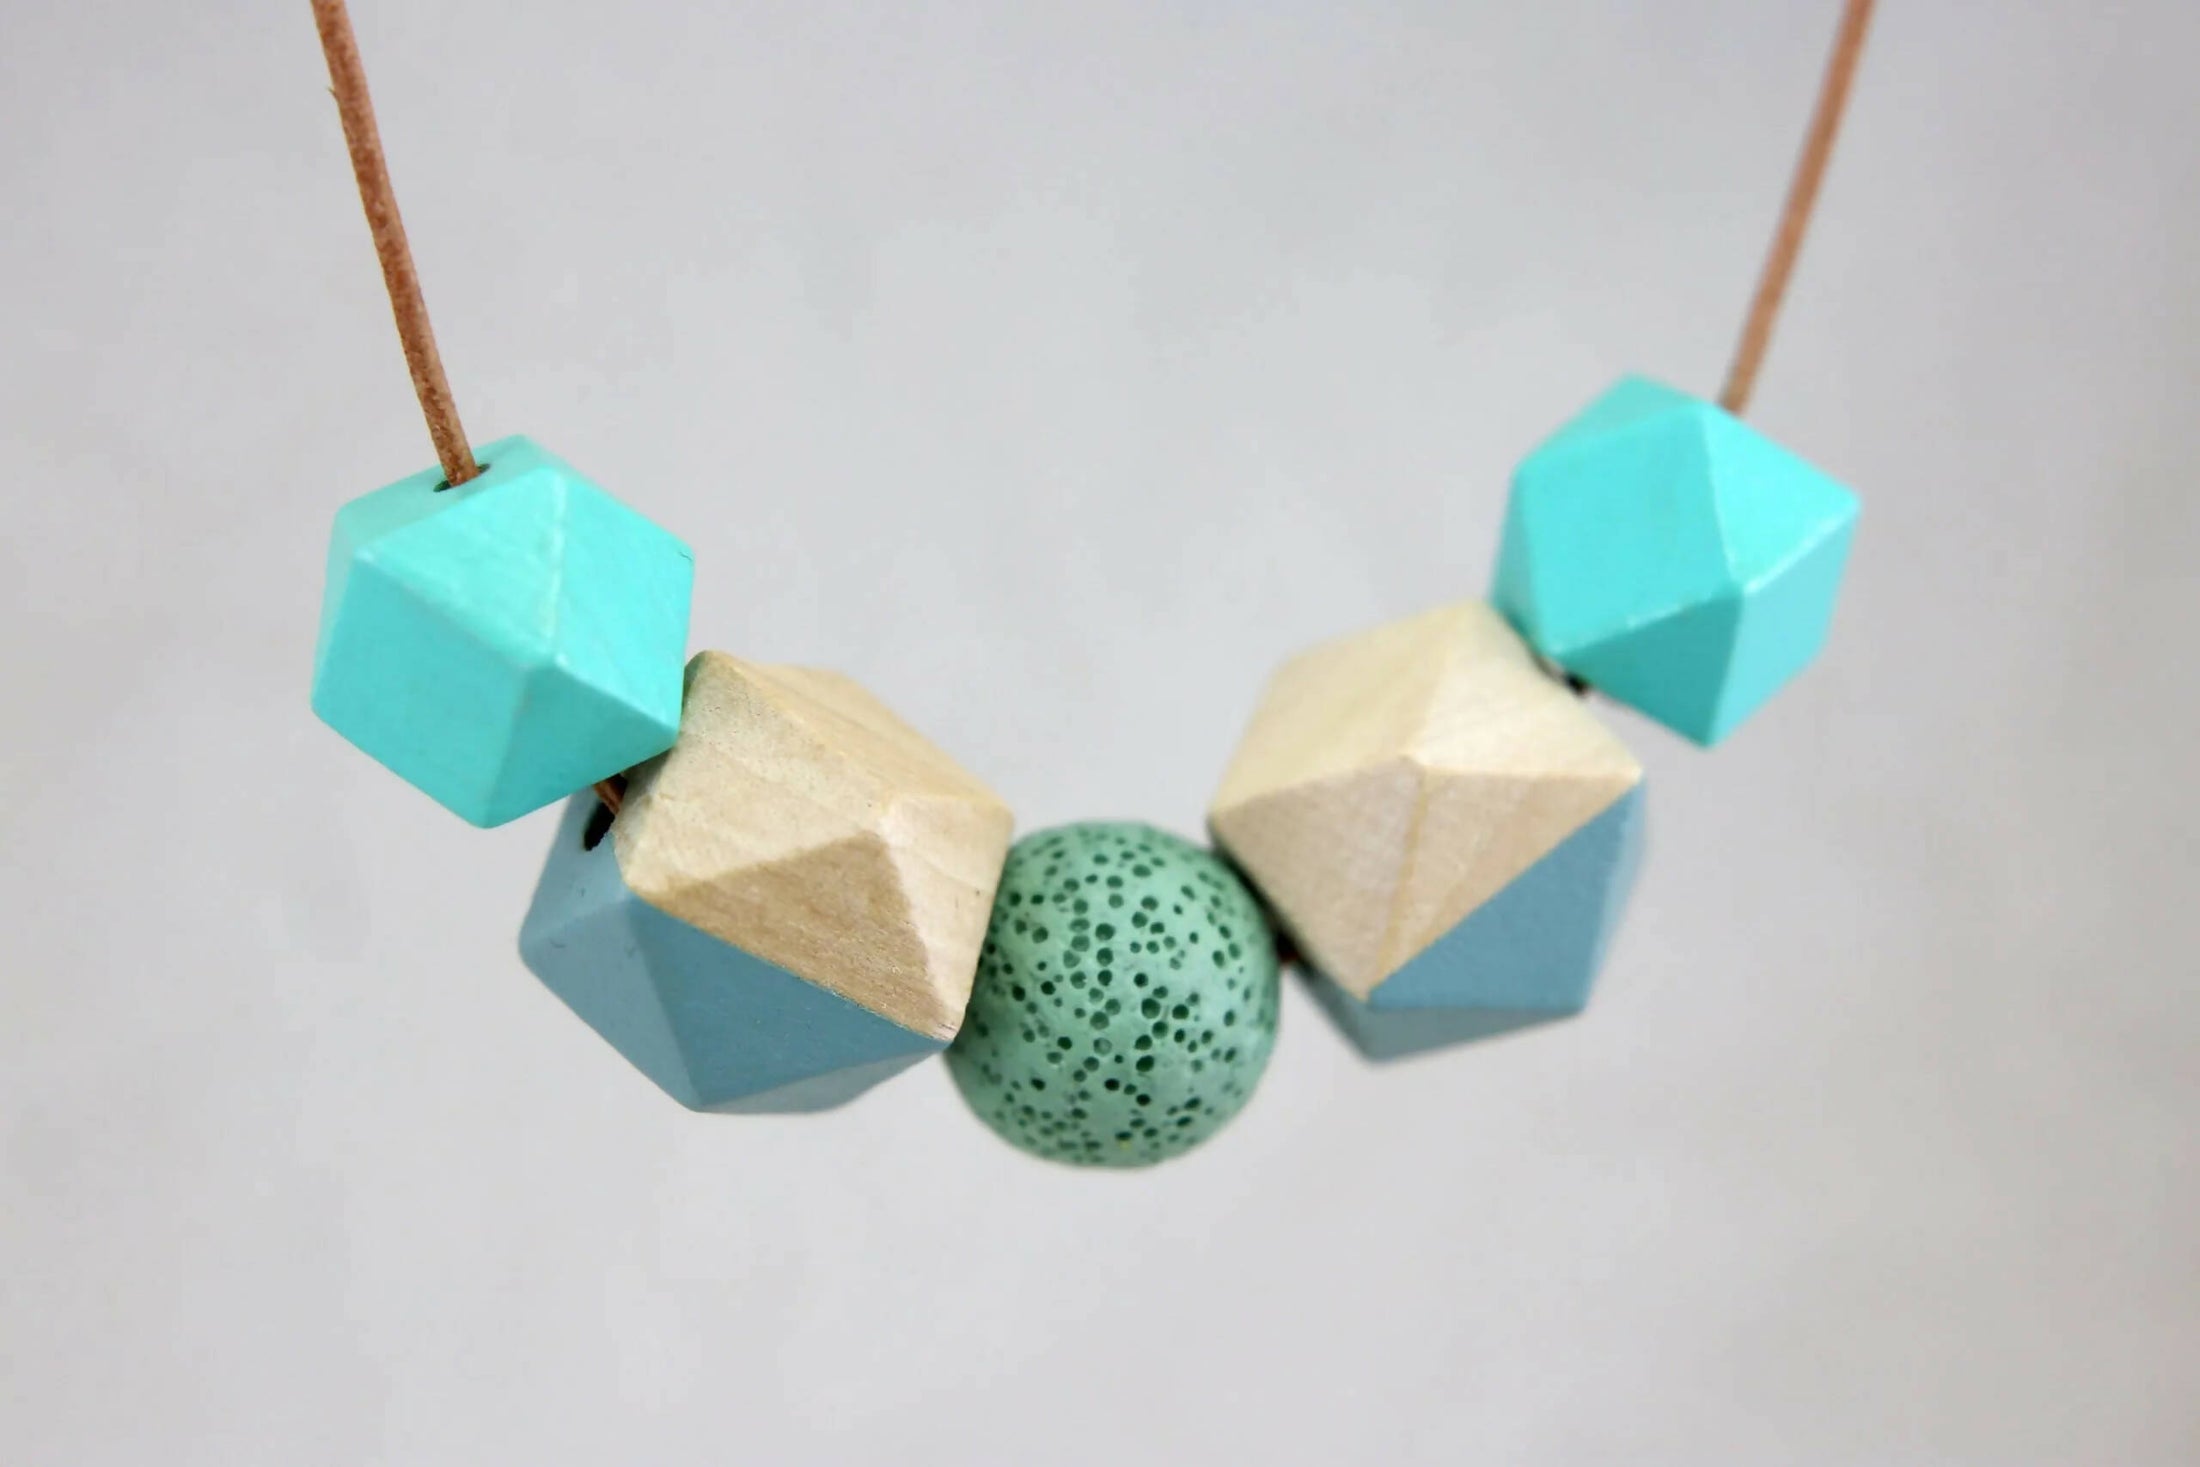 essential-oil-diffuser-mint-necklace-5fb158a9-scaled.jpg.webp